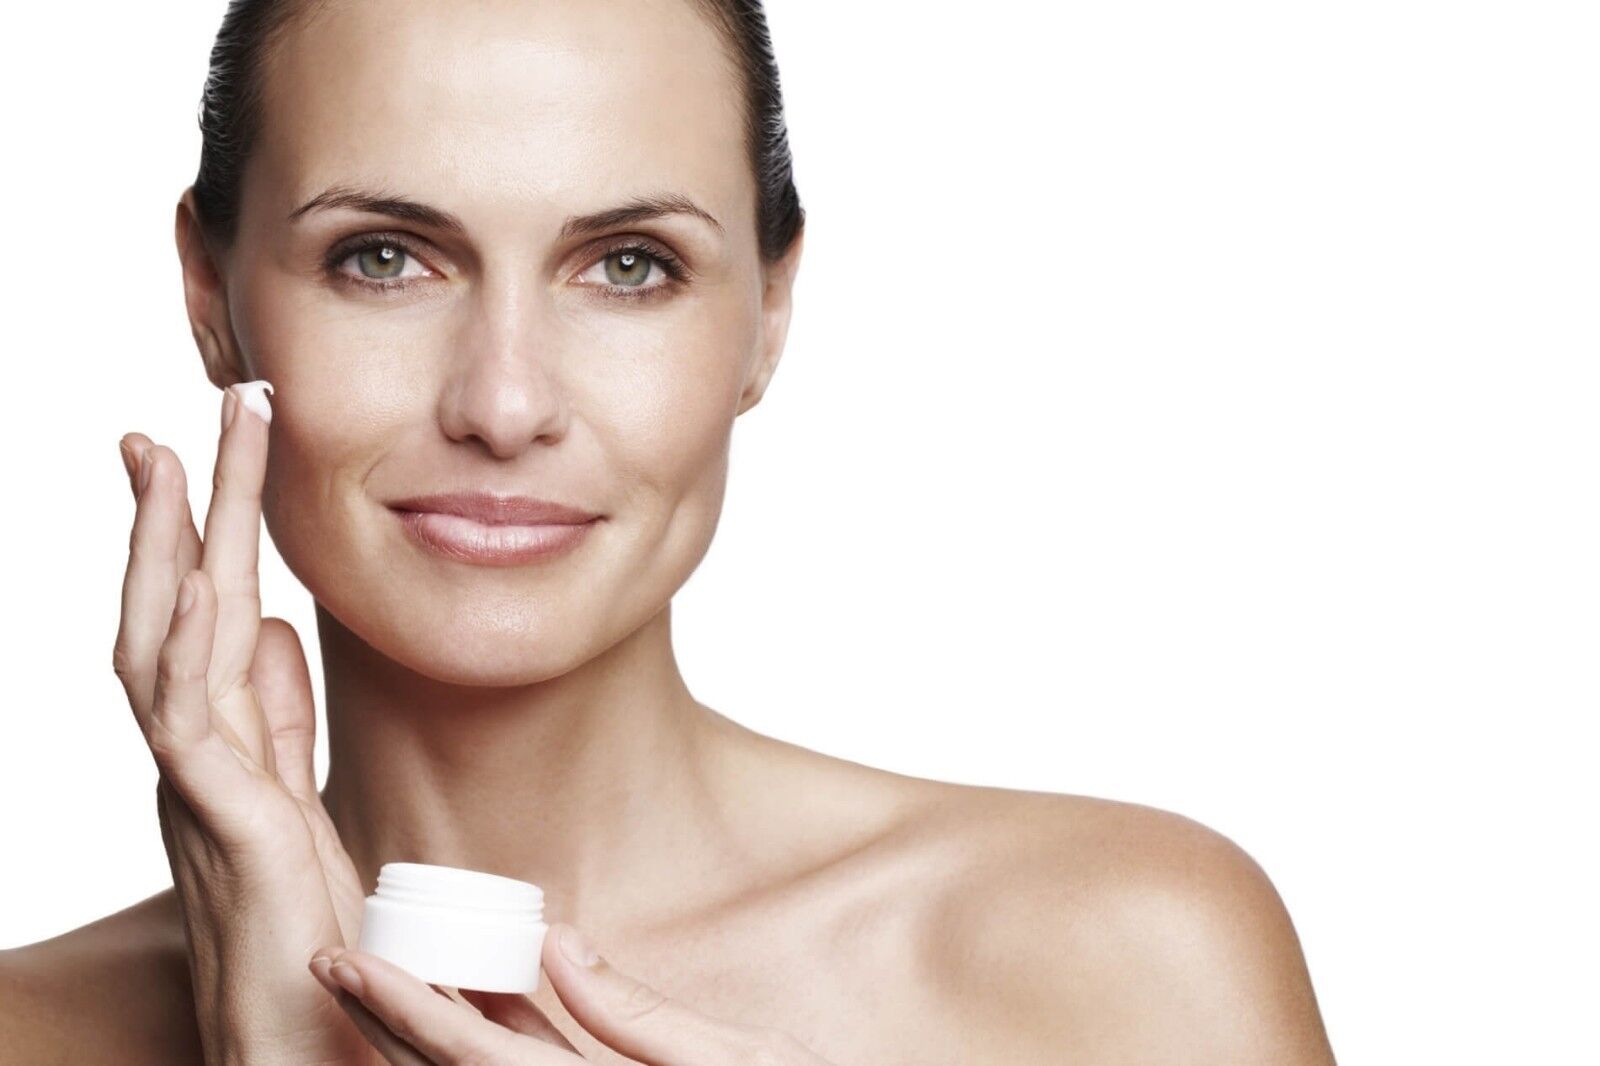 Anti-Aging Products Market